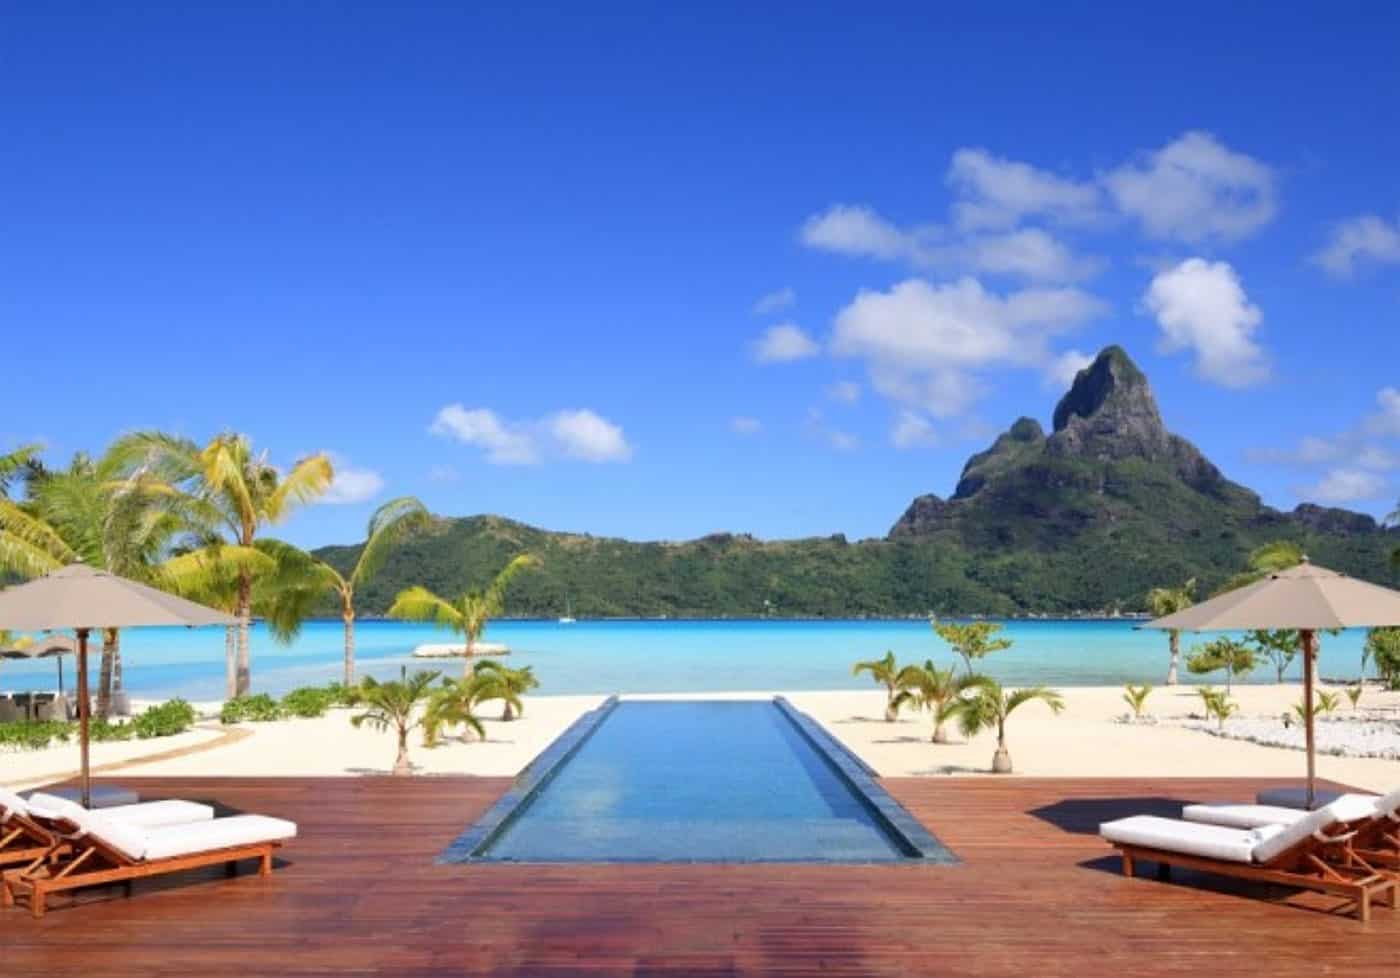 Incredible view of the pool and Mt Otemanu from Bora Bora One Resort.